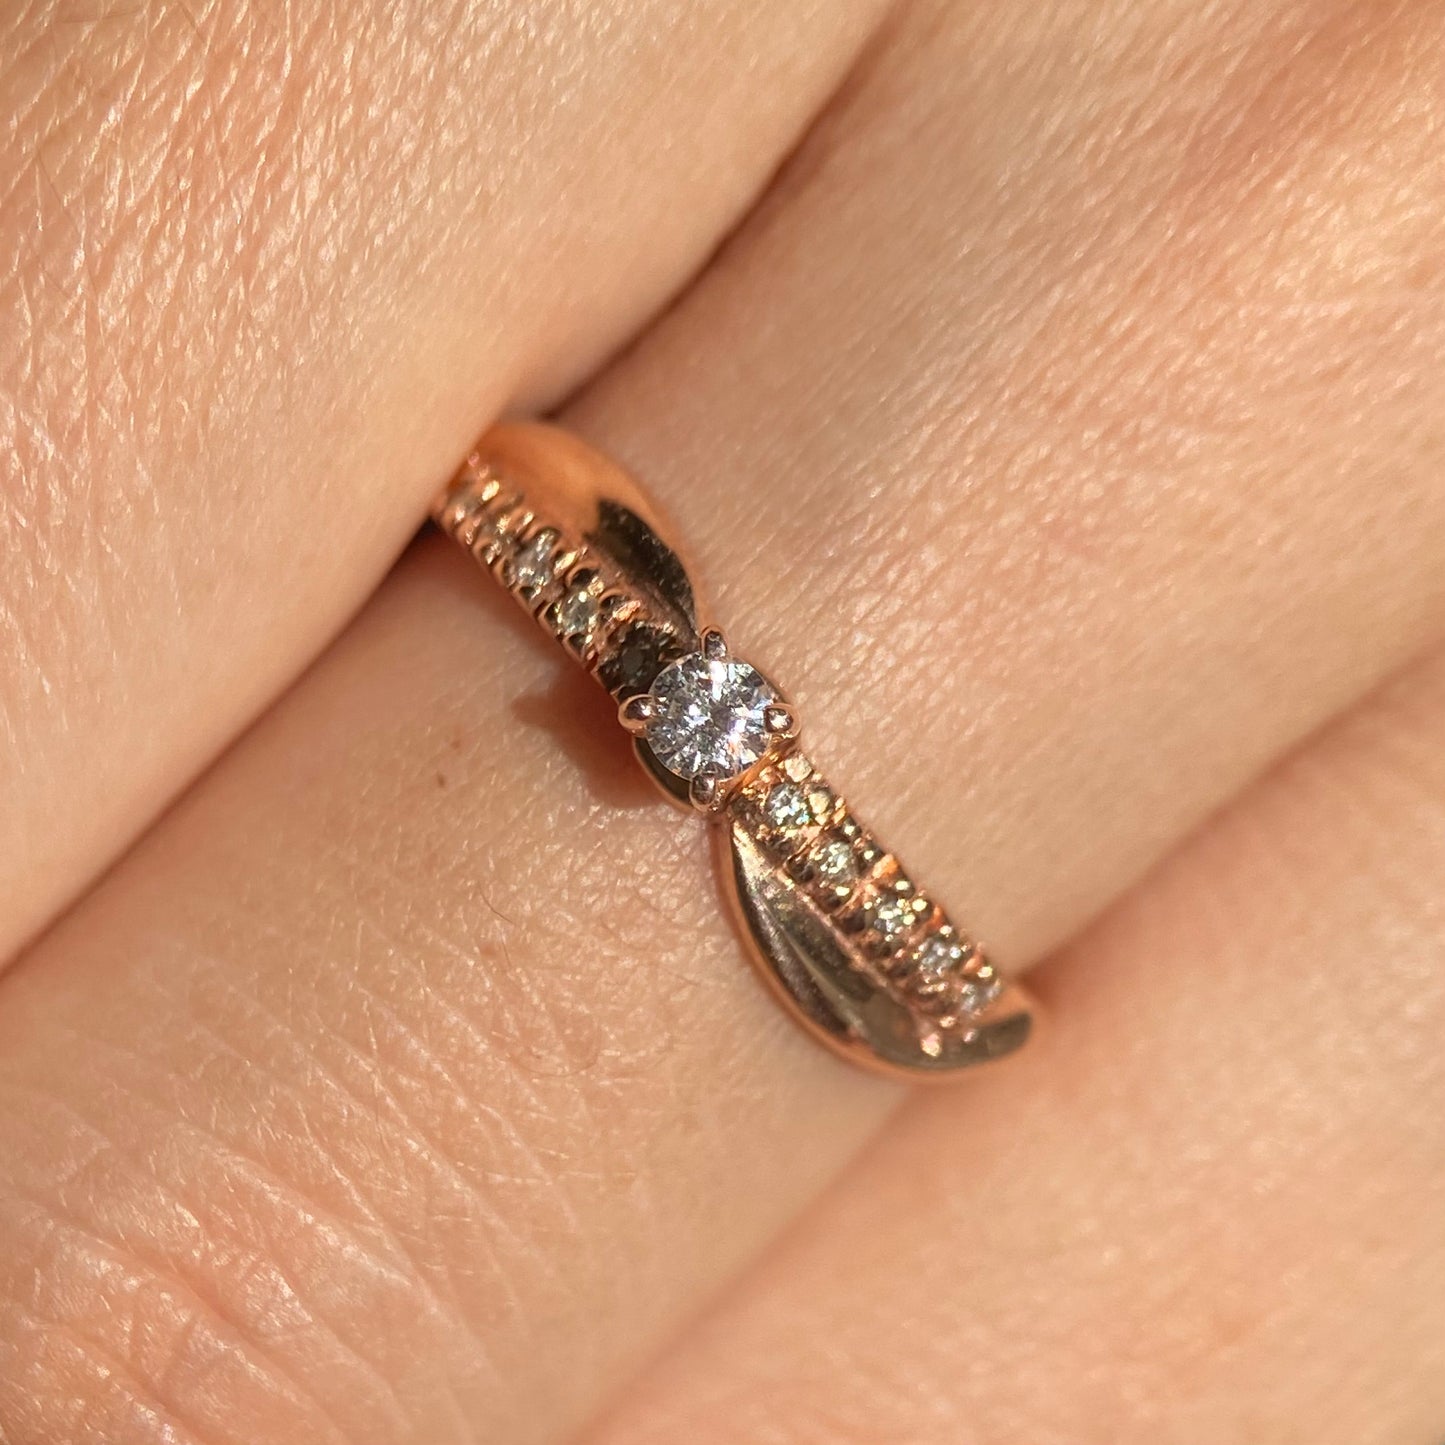 14k Rose Gold Ring with Diamonds Mod: OF1595